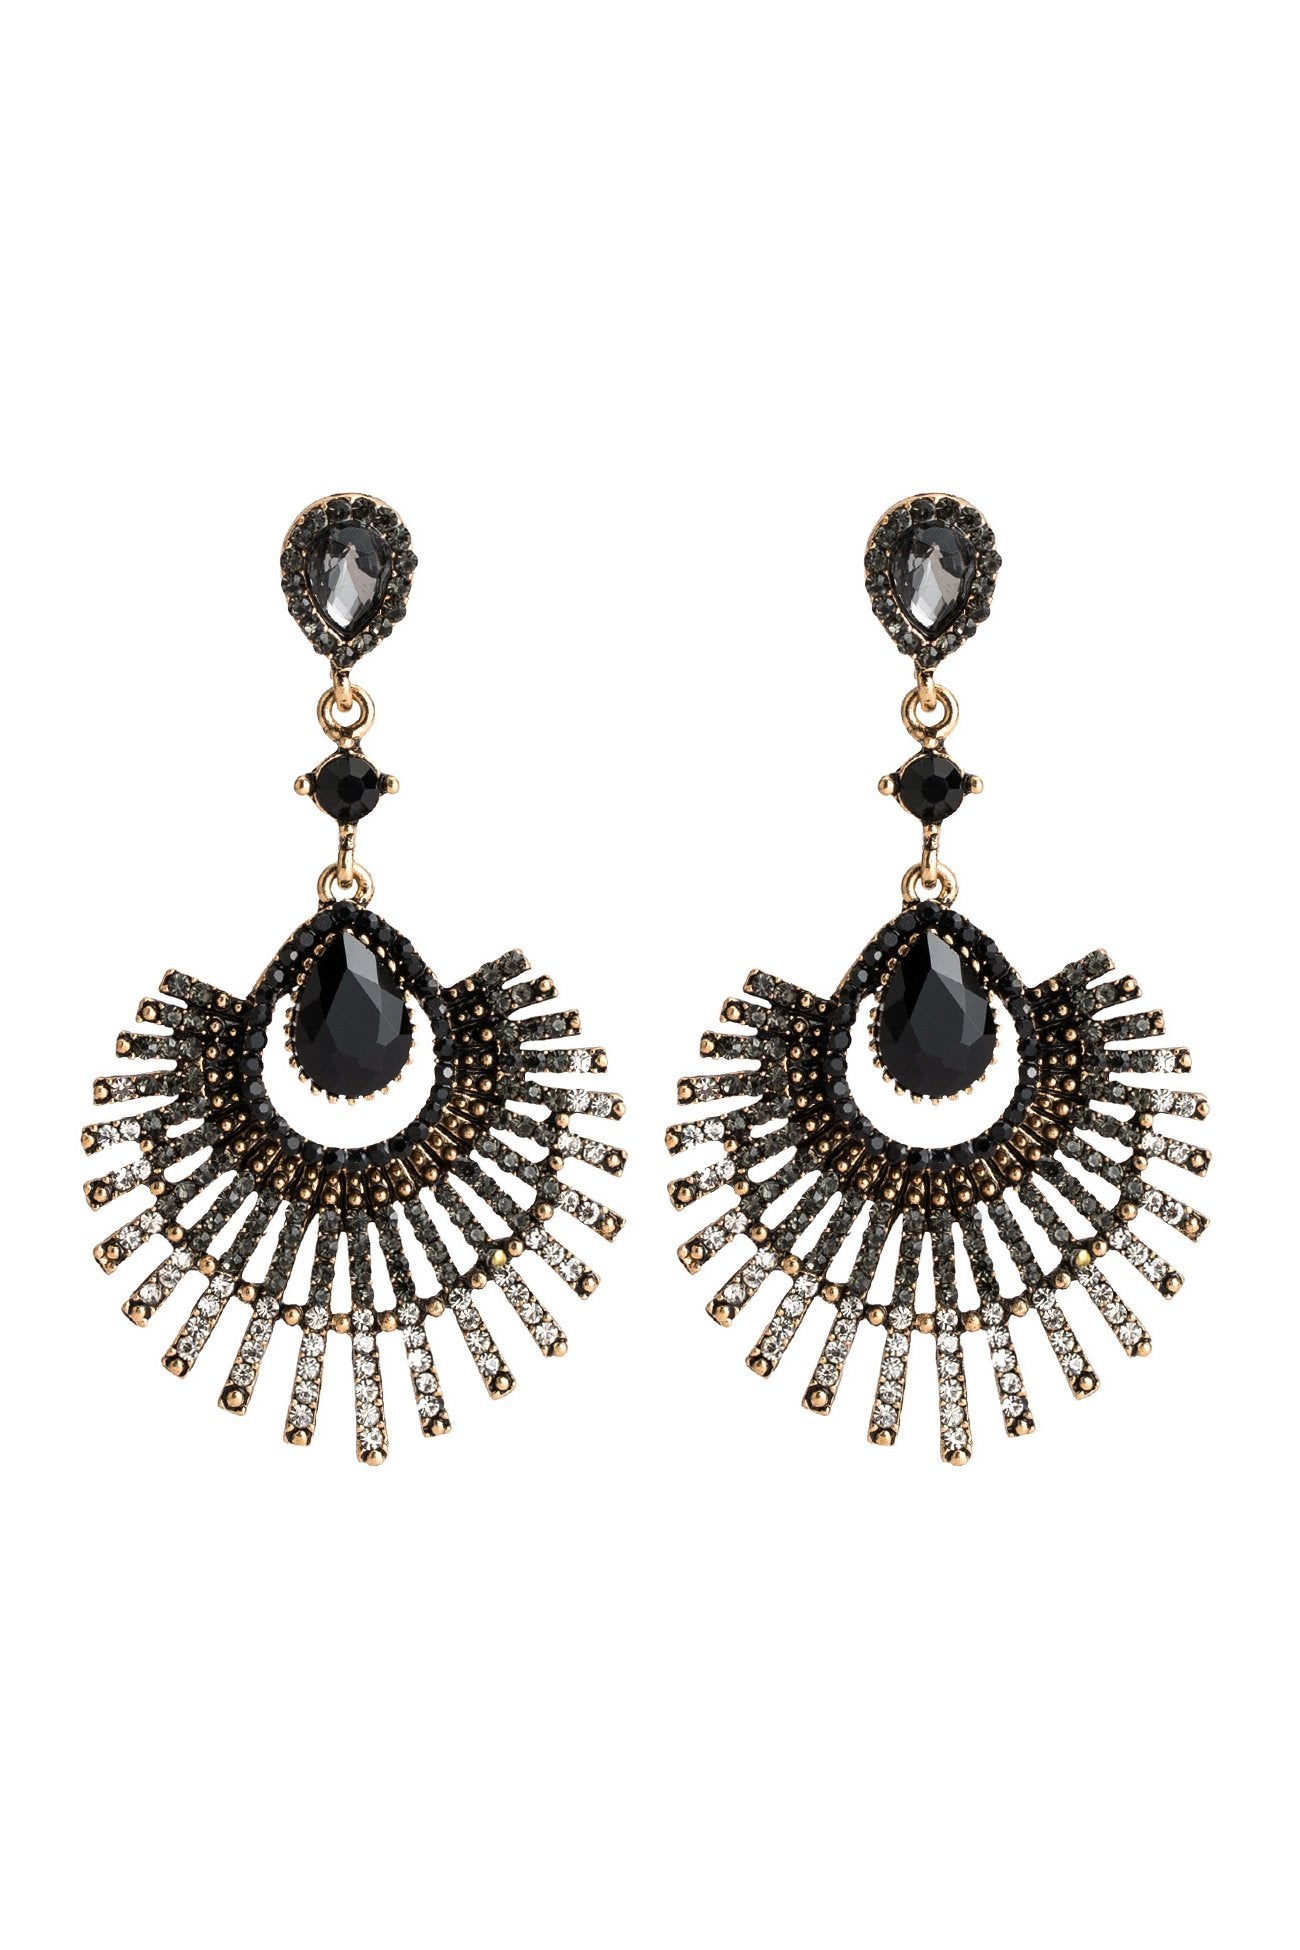 Alloy Earrings with Crystals Rhinestone CE0142